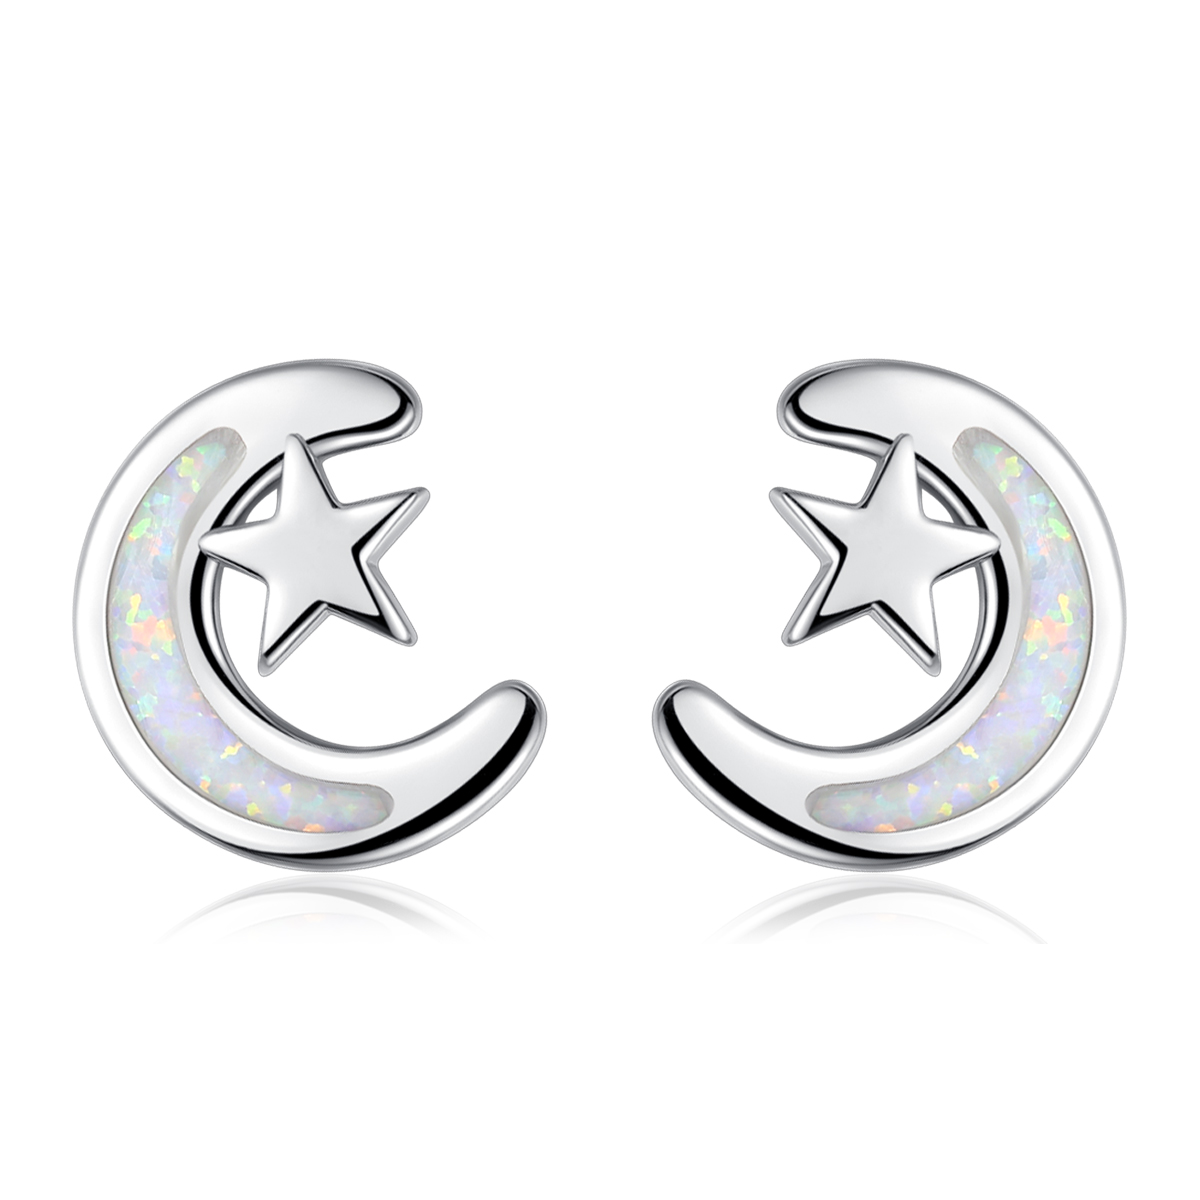 Merryshine Jewelry 925 Sterling Silver Rhodium Plated White Opal Crescent Moon Star Earrings